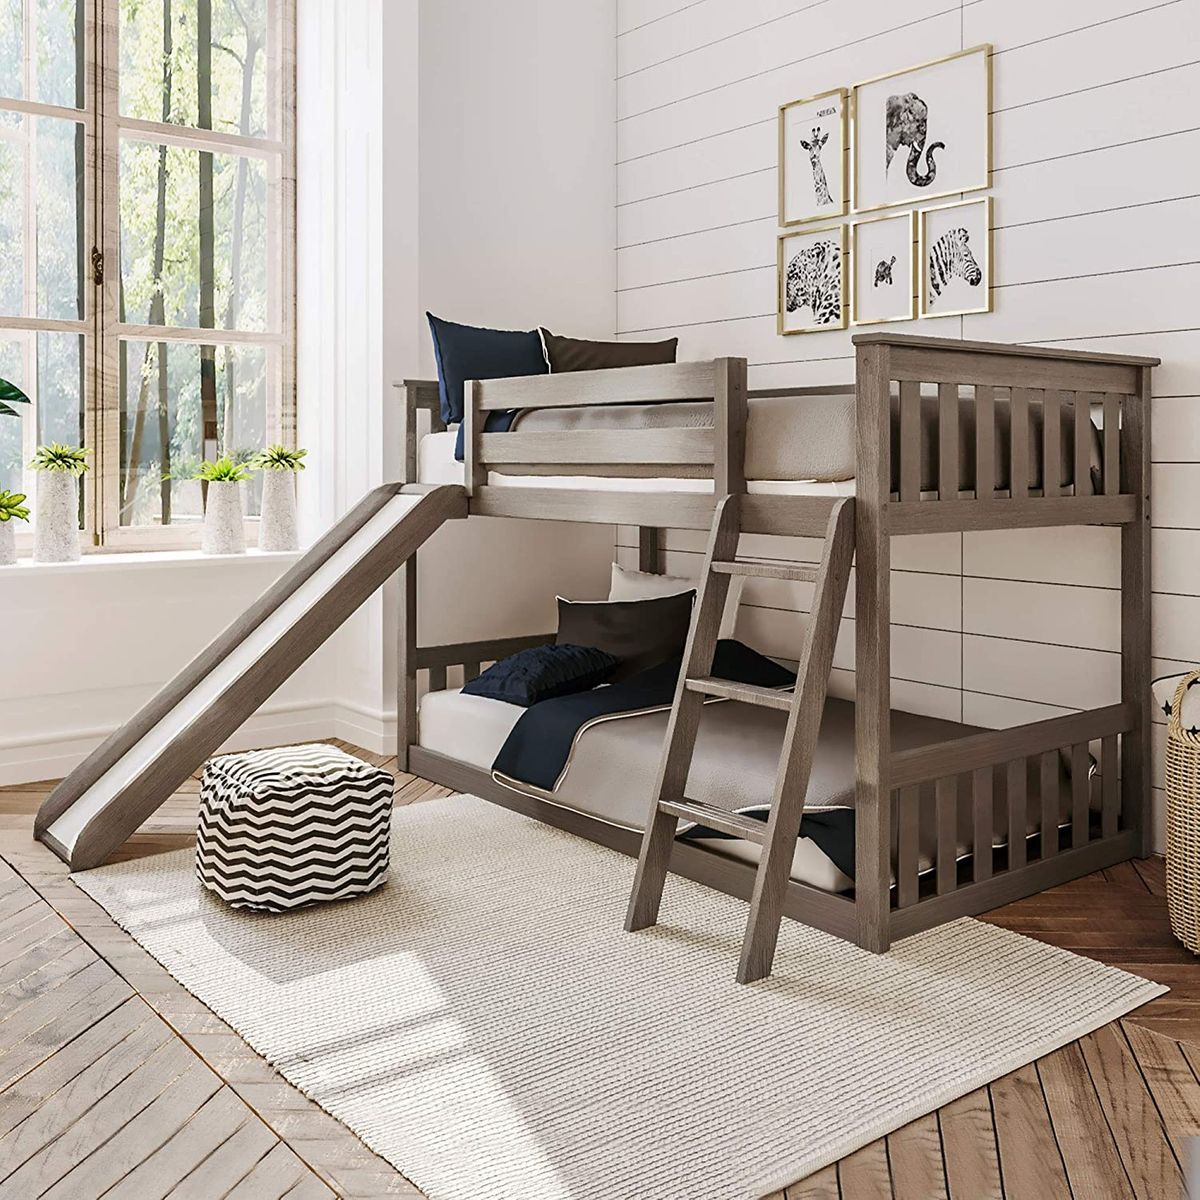 8 Best Bunk Beds 2020 The Strategist, Twin Beds That Convert To Bunk